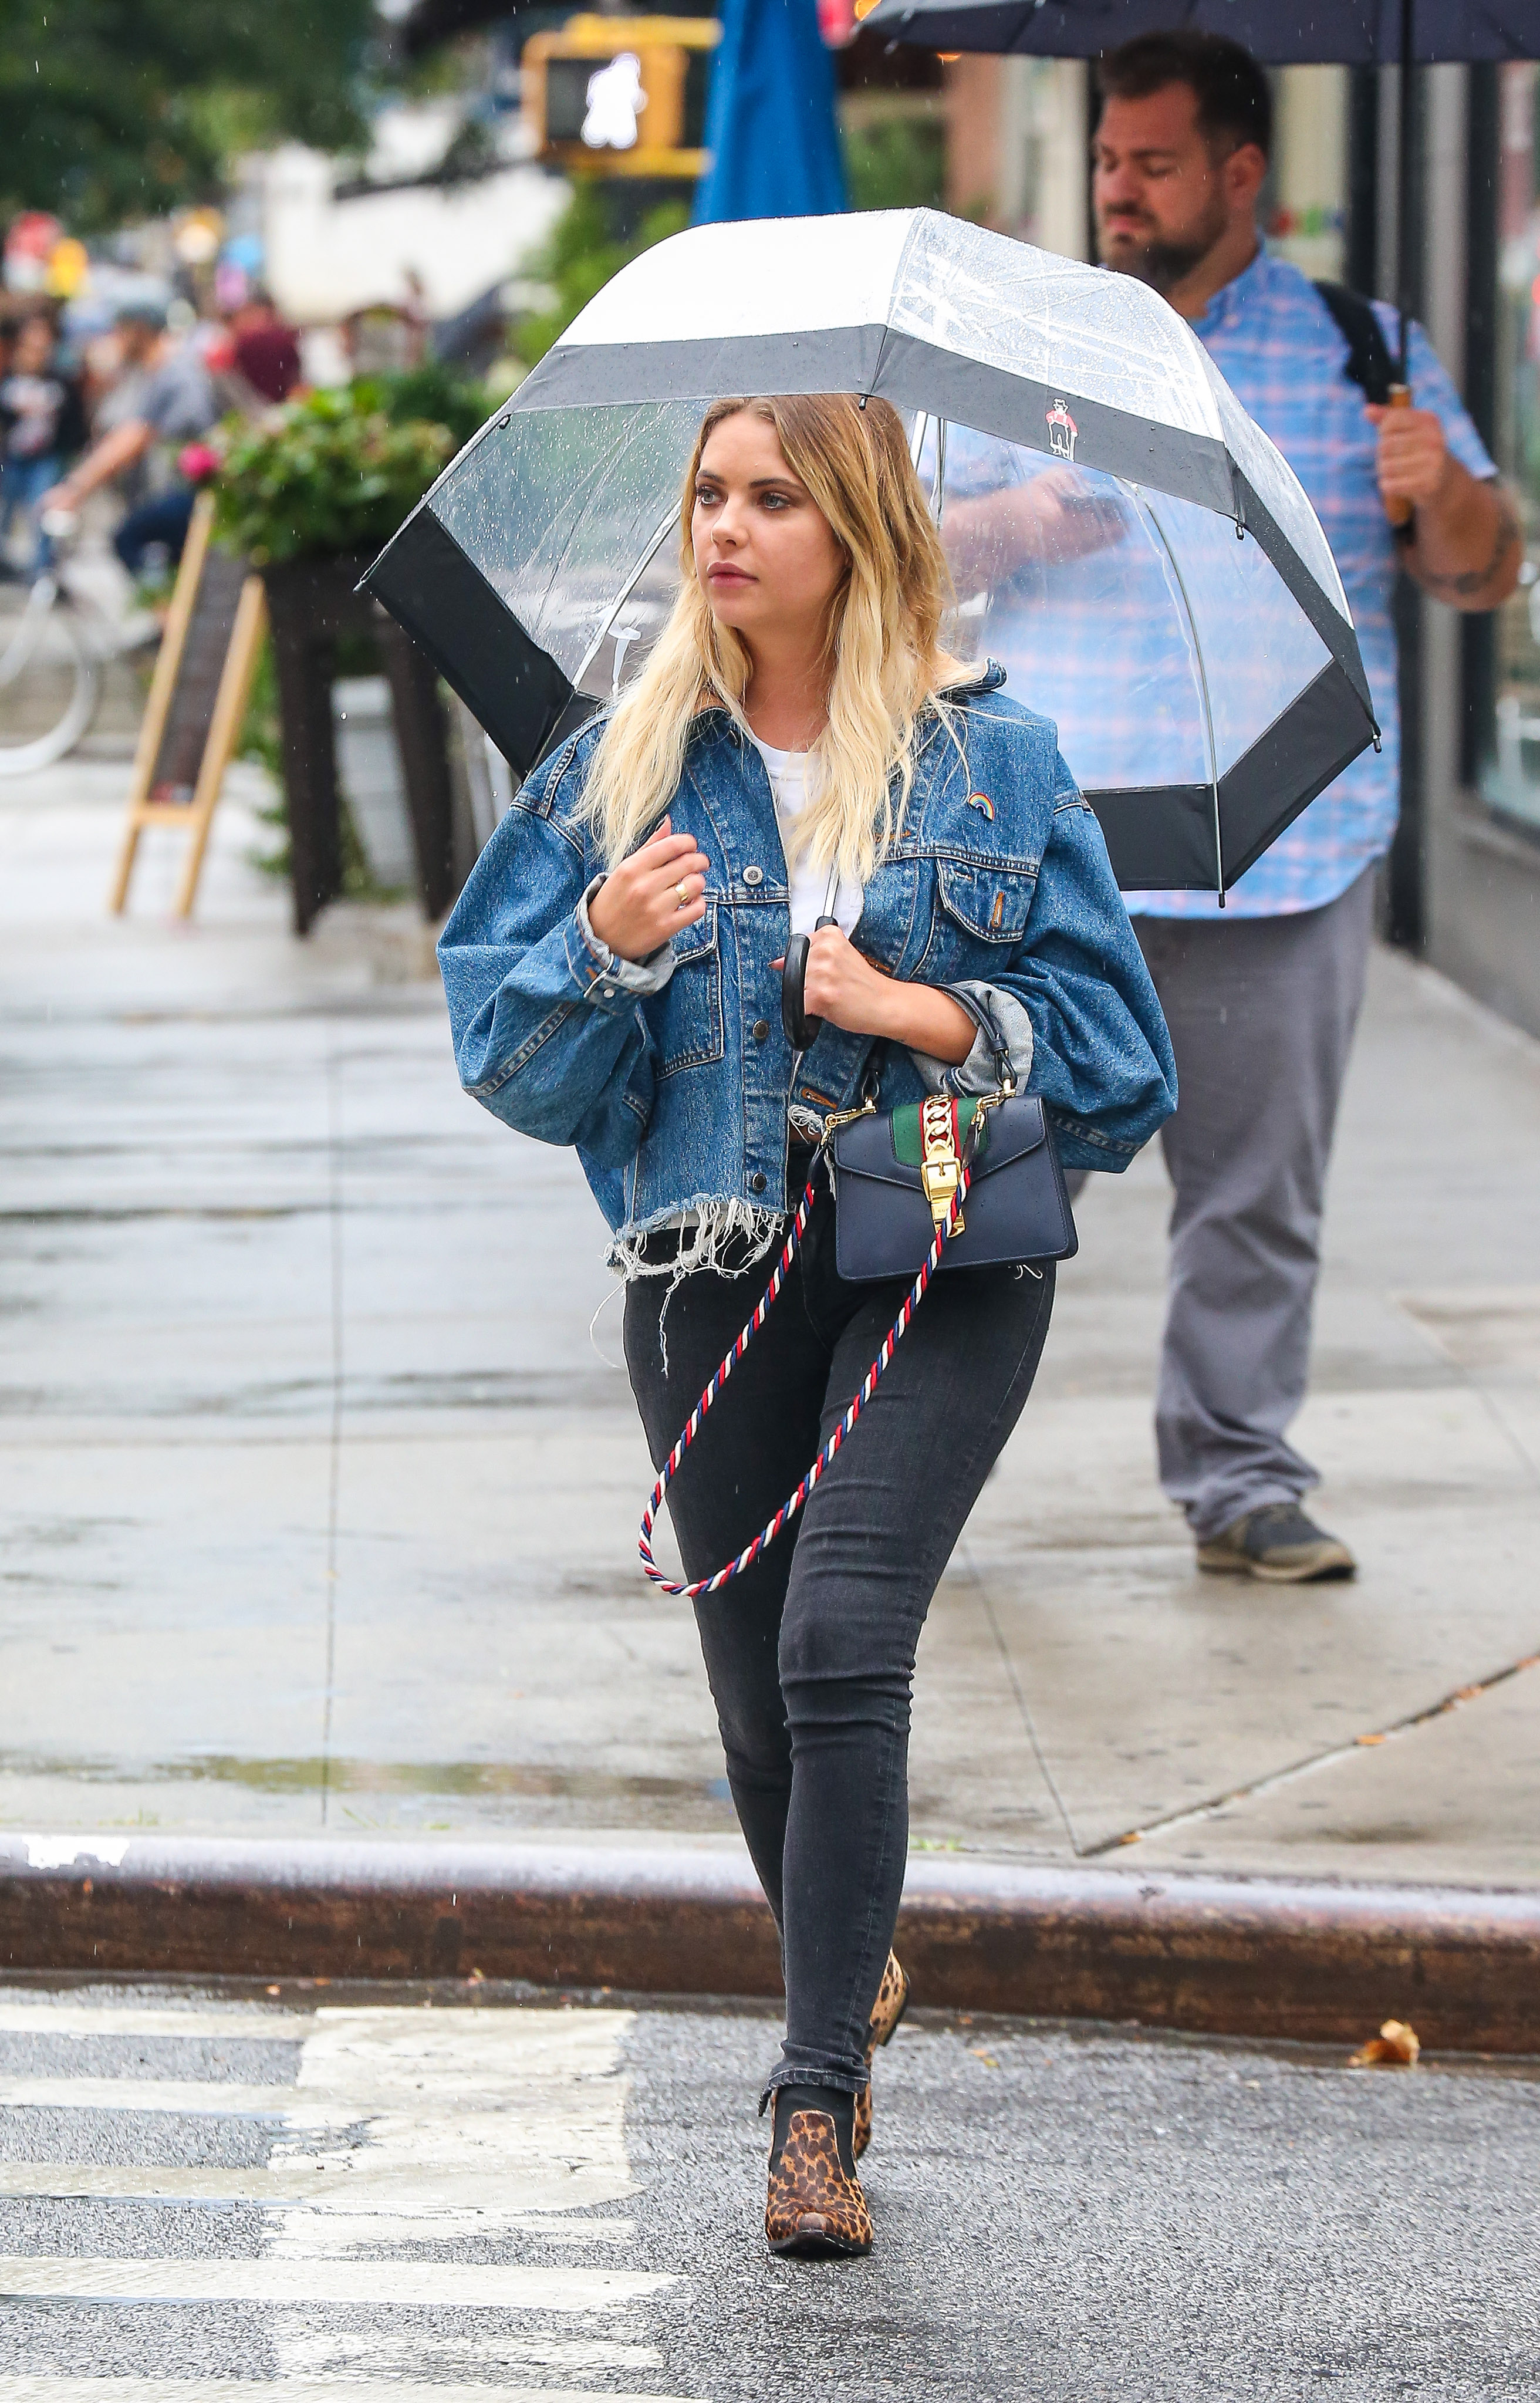 ashley-benson-out-in-nyc-8217-10.jpg